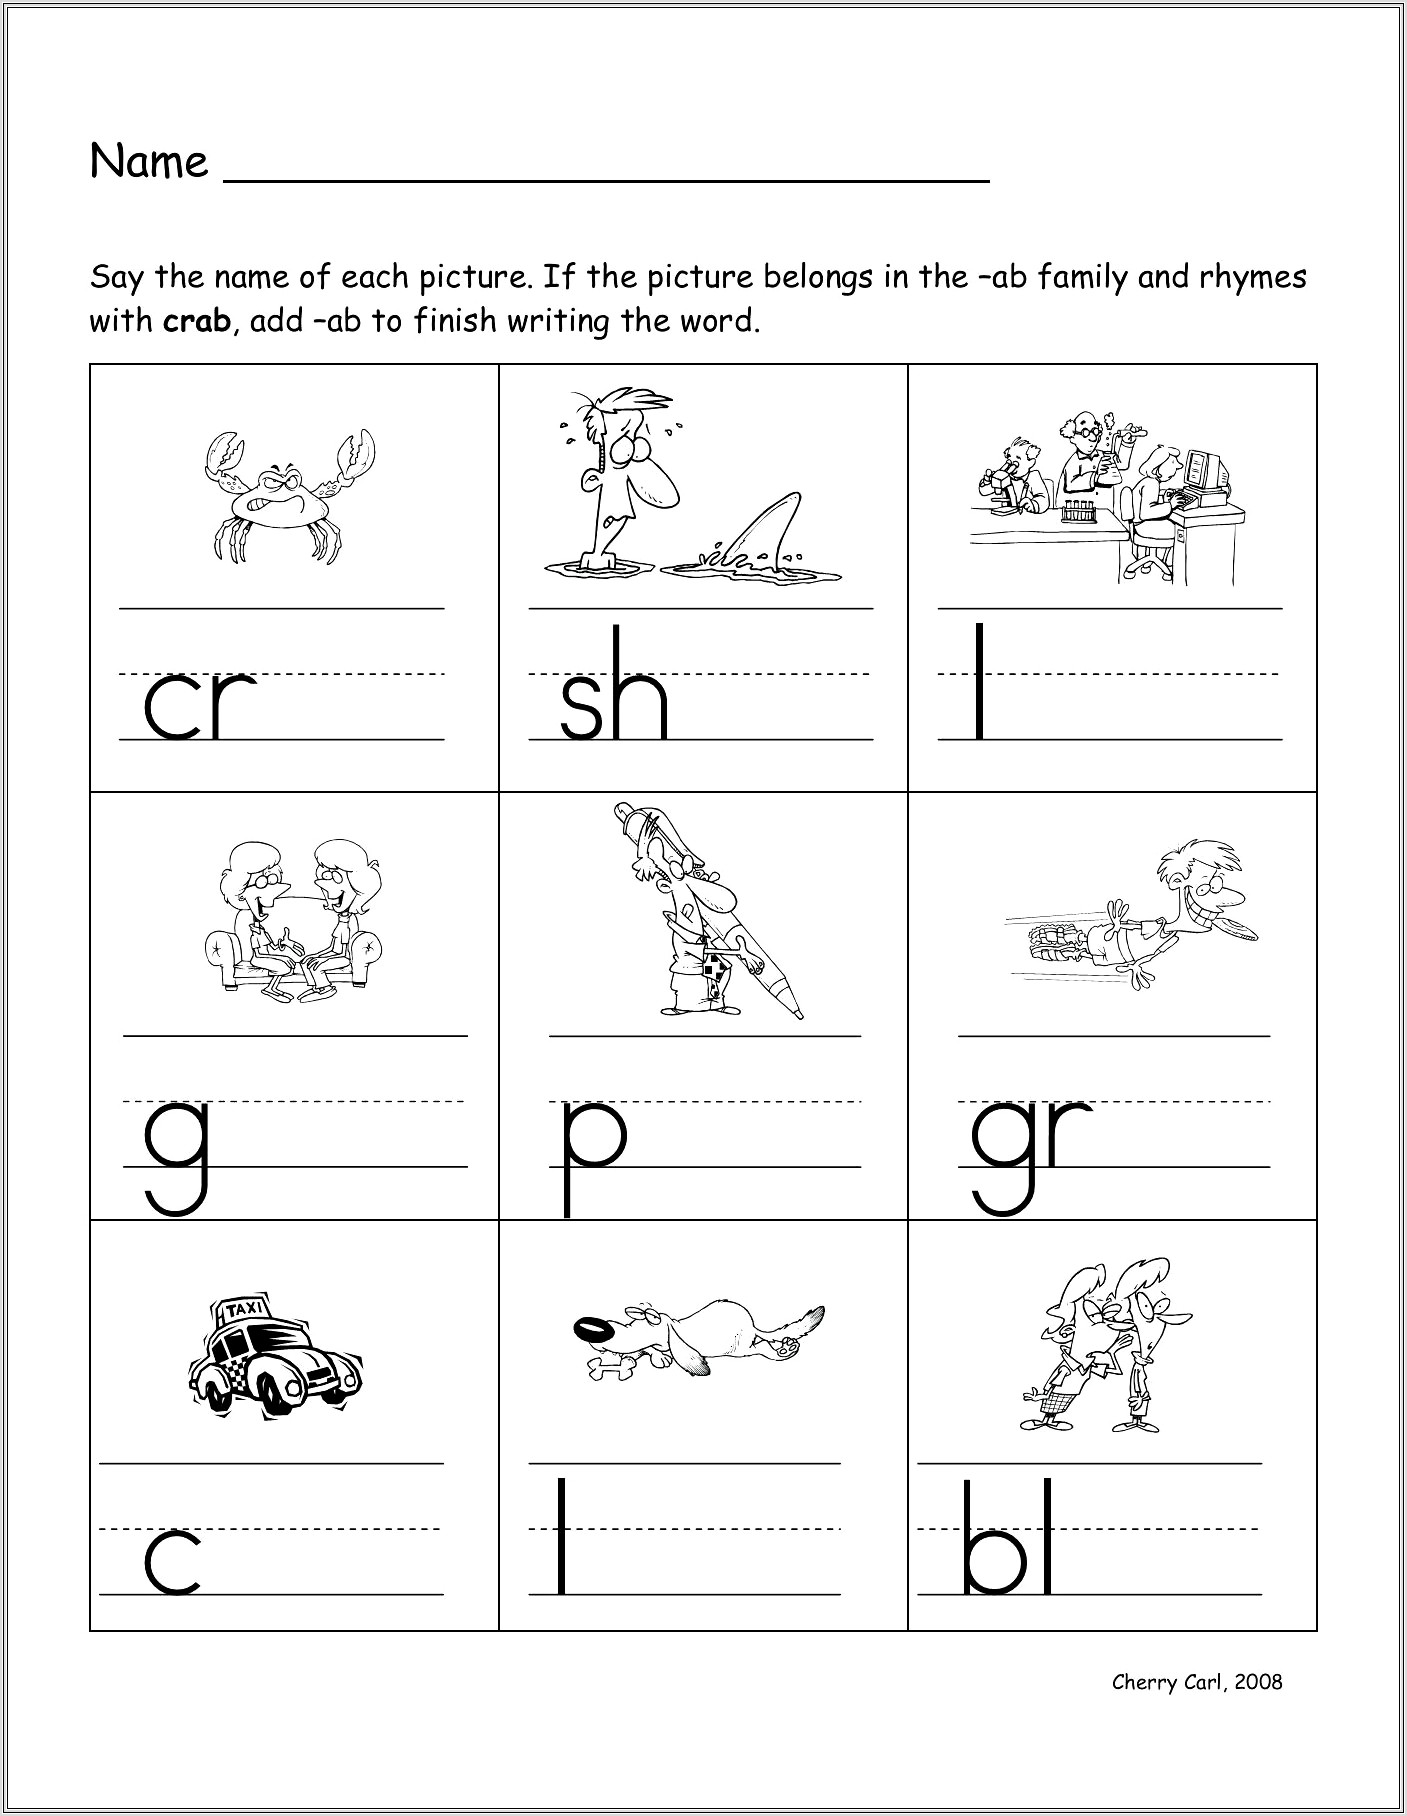 Ink Word Family Worksheets Cherry Carl